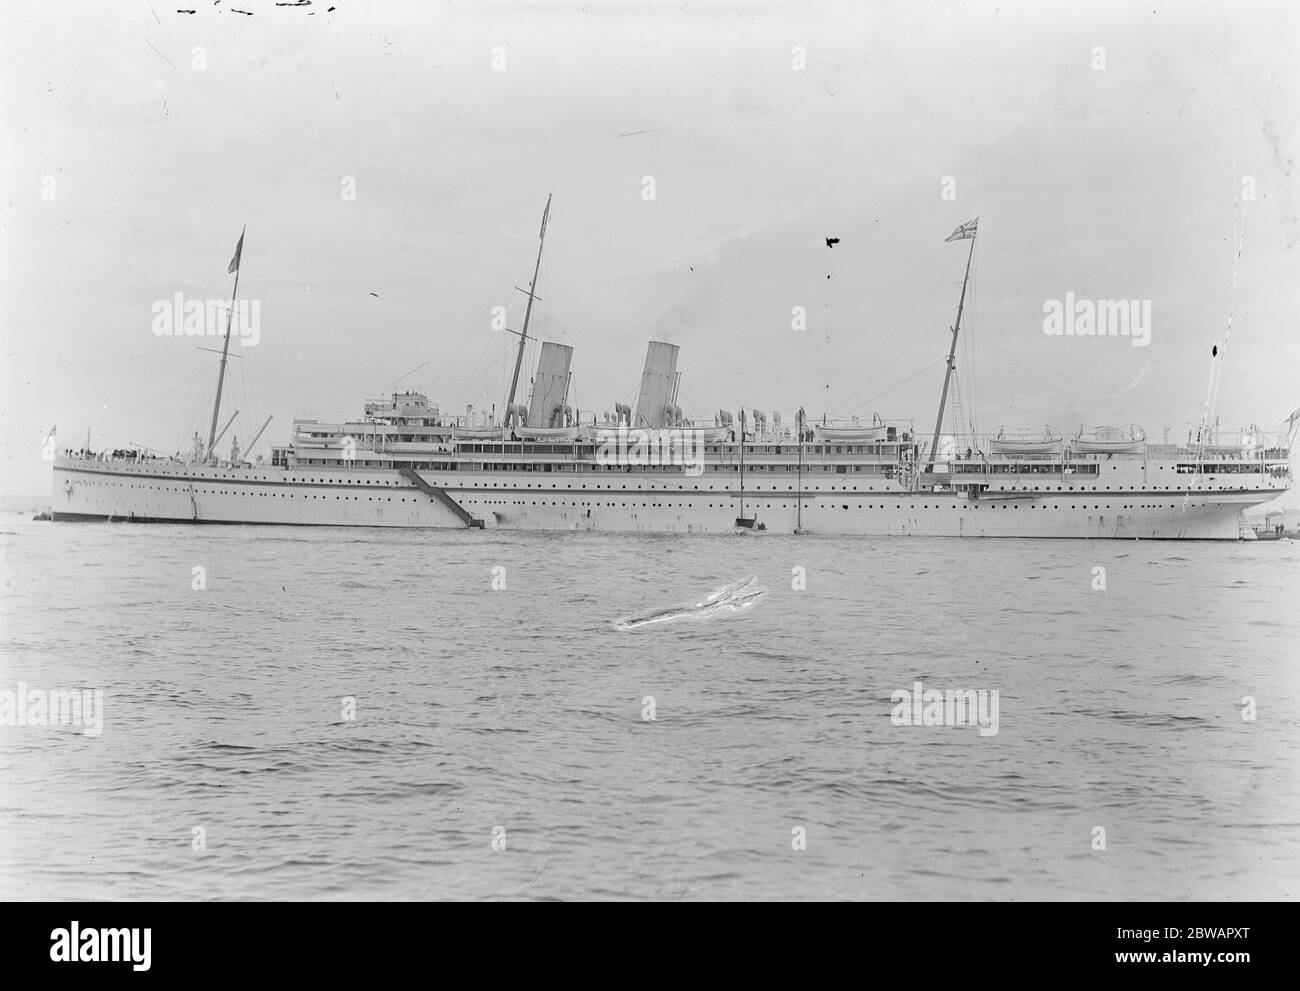 RMS Medina was a ship built by Caird and Company, Greenock, Scotland, in 1911, for the Peninsular and Oriental Steam Navigation Company. She was a Royal Mail Ship intended for use on the London to Australia route and was the last of the ten ships in P&O's M-Class Stock Photo